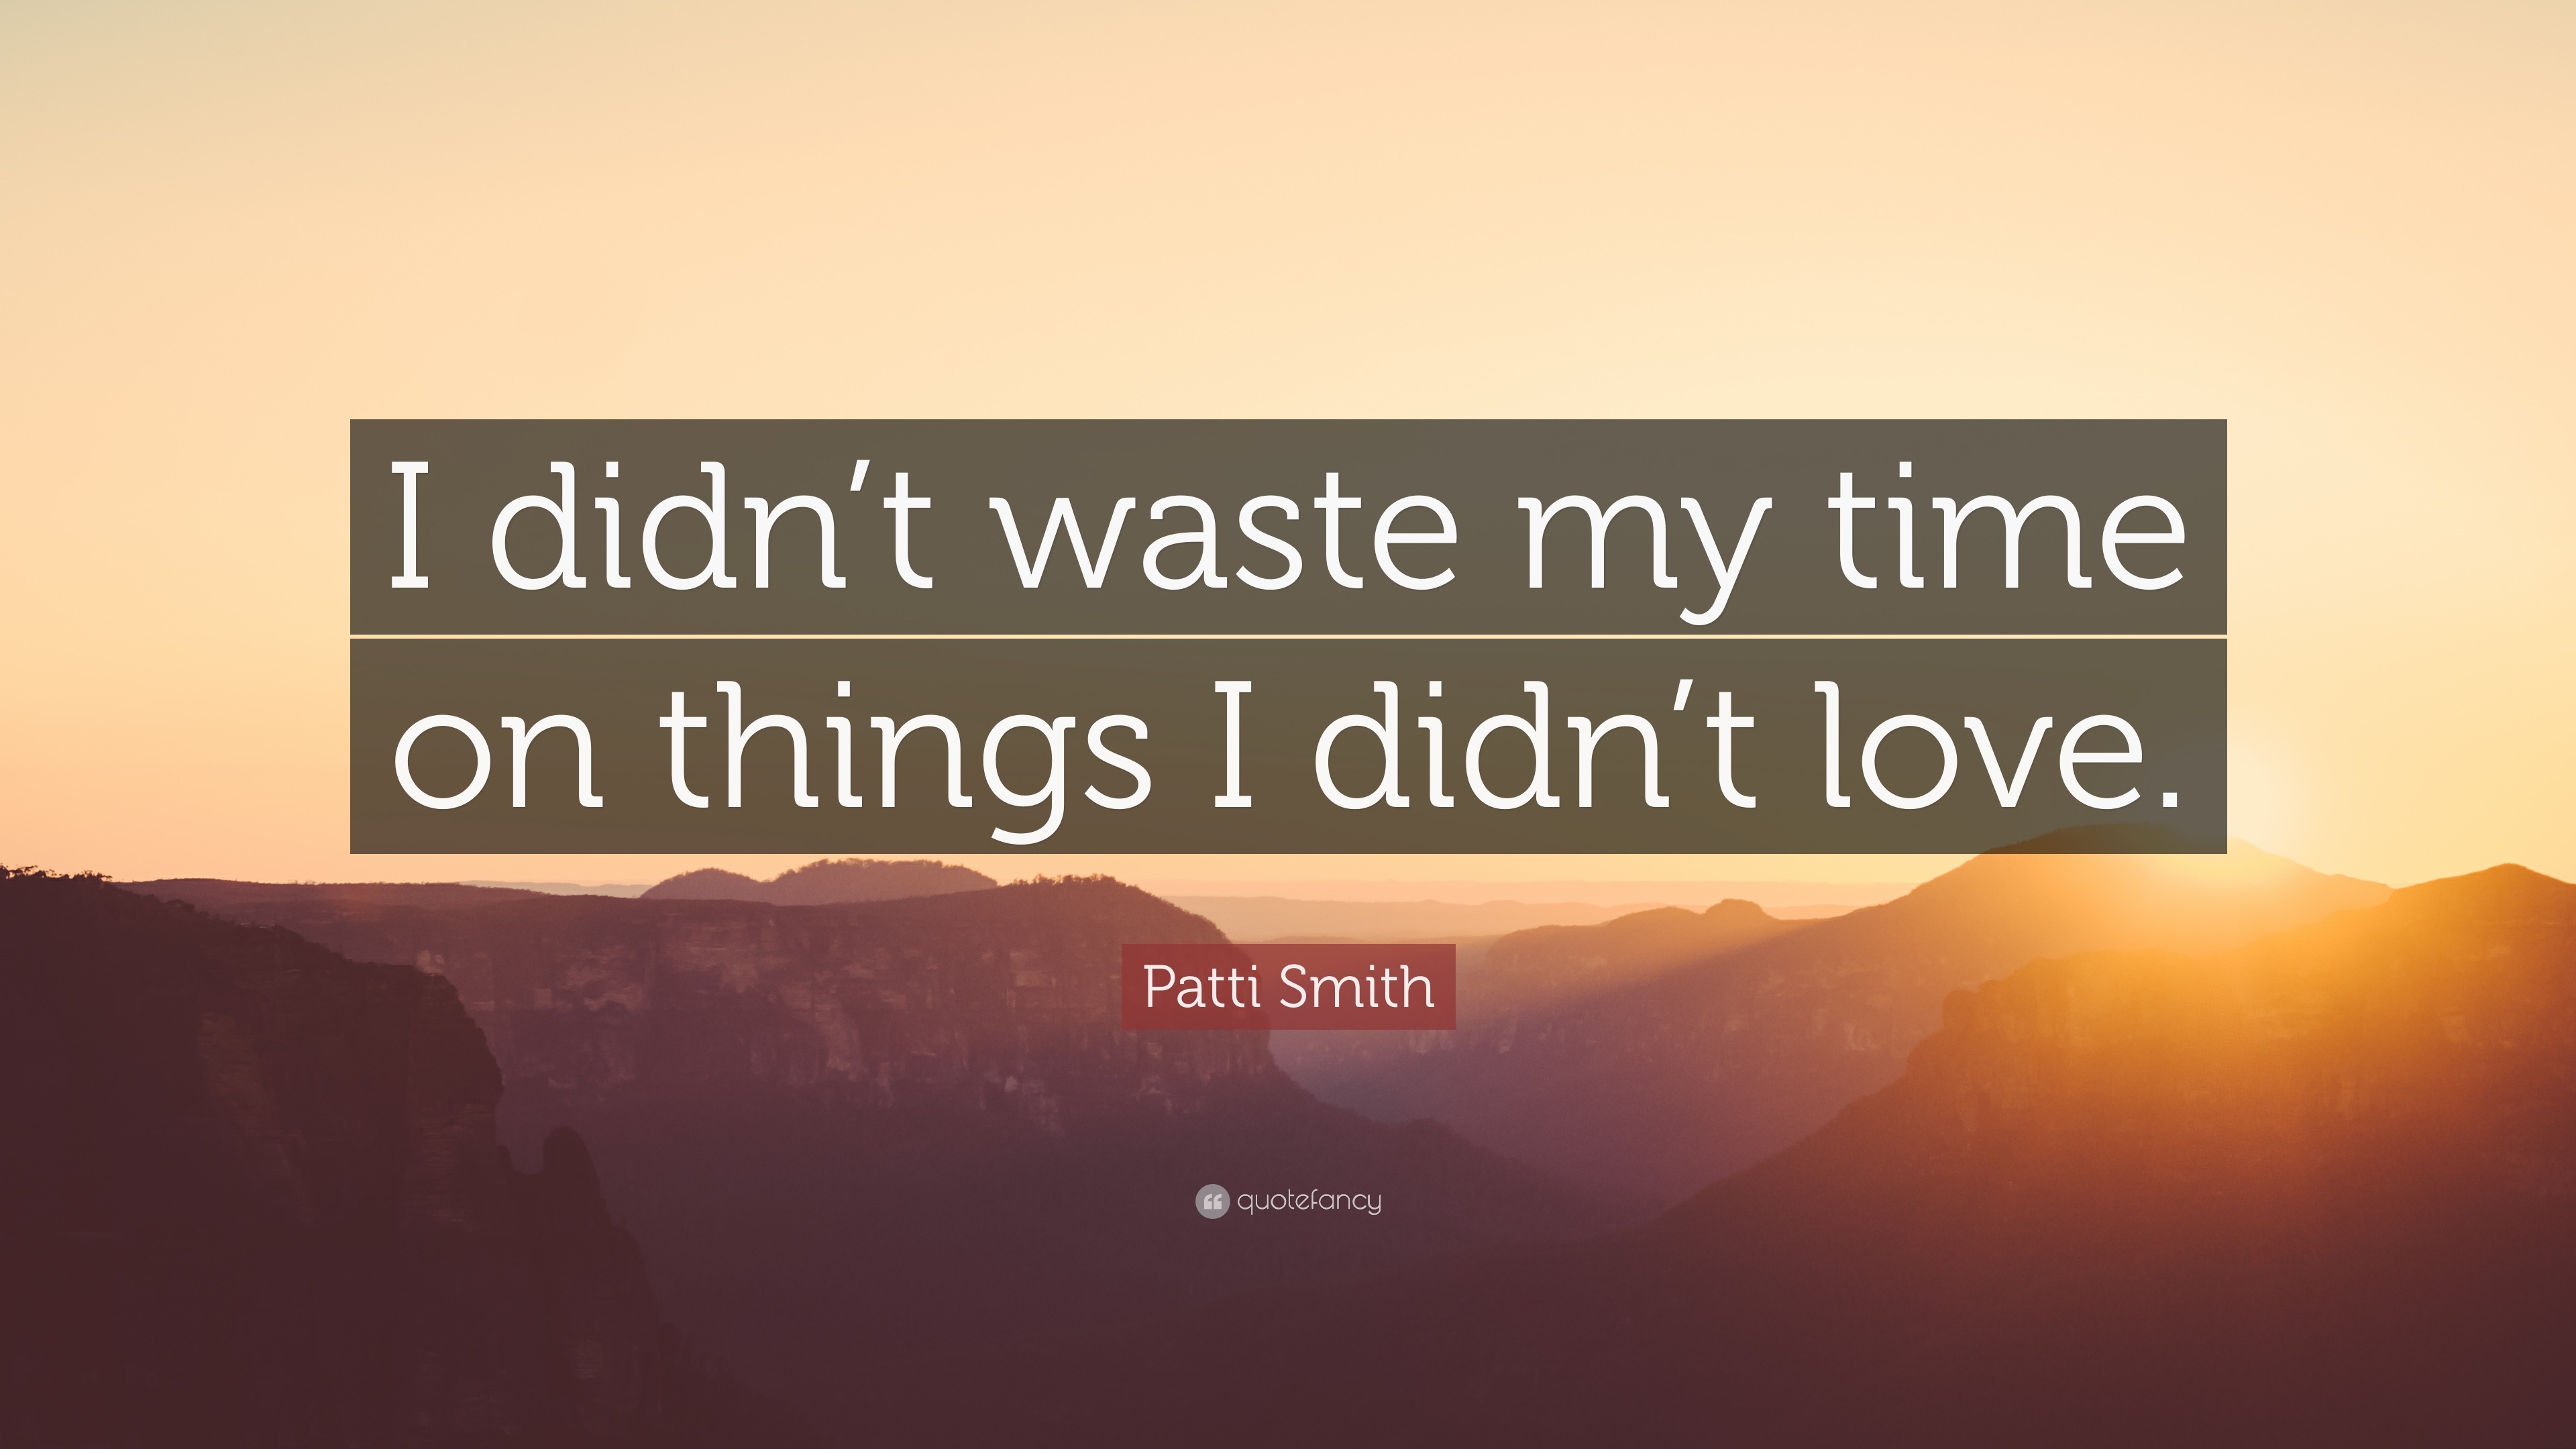 Patti Smith Quote “I didn t waste my time on things I didn